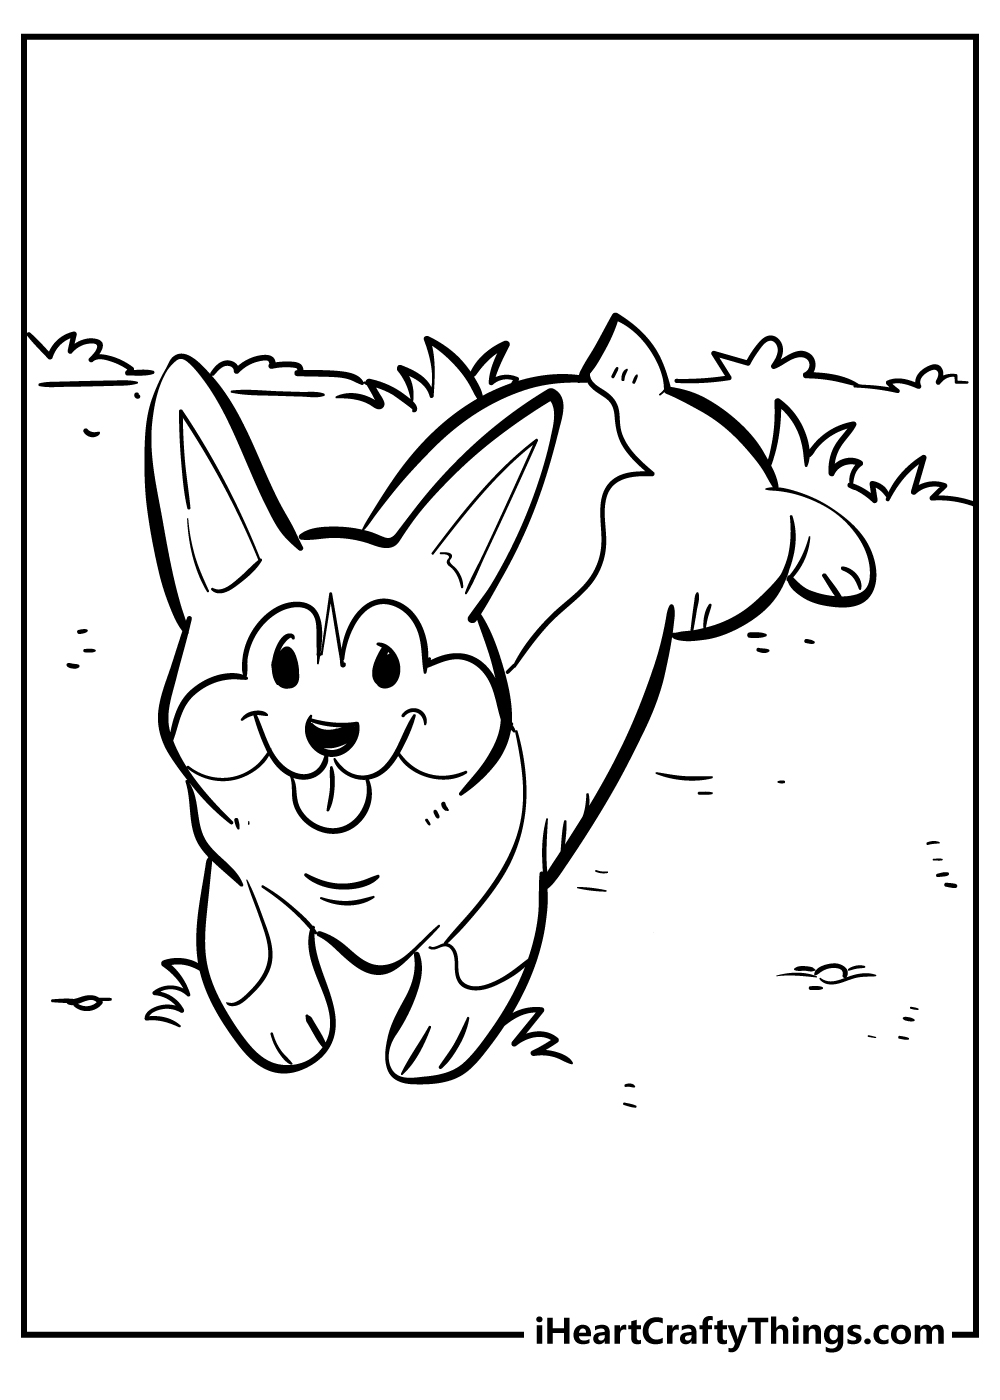 Corgi Coloring Pages for adults free printable